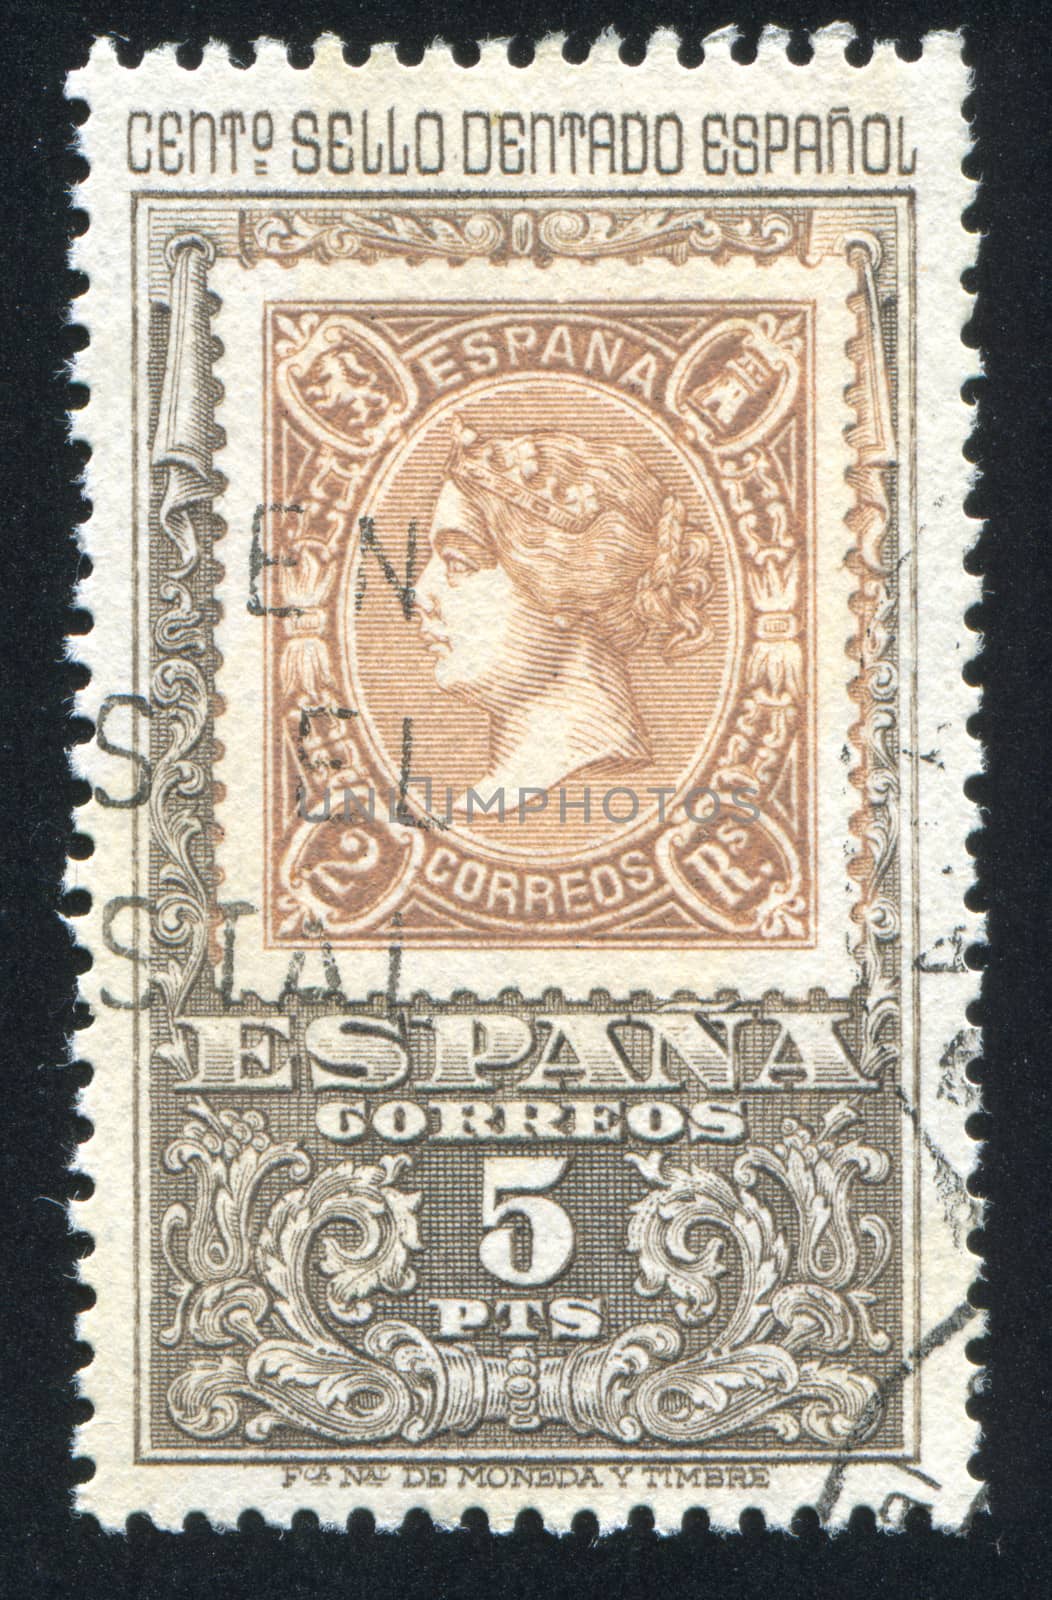 SPAIN - CIRCA 1965: stamp printed by Spain, shows Queen Isabel, circa 1965